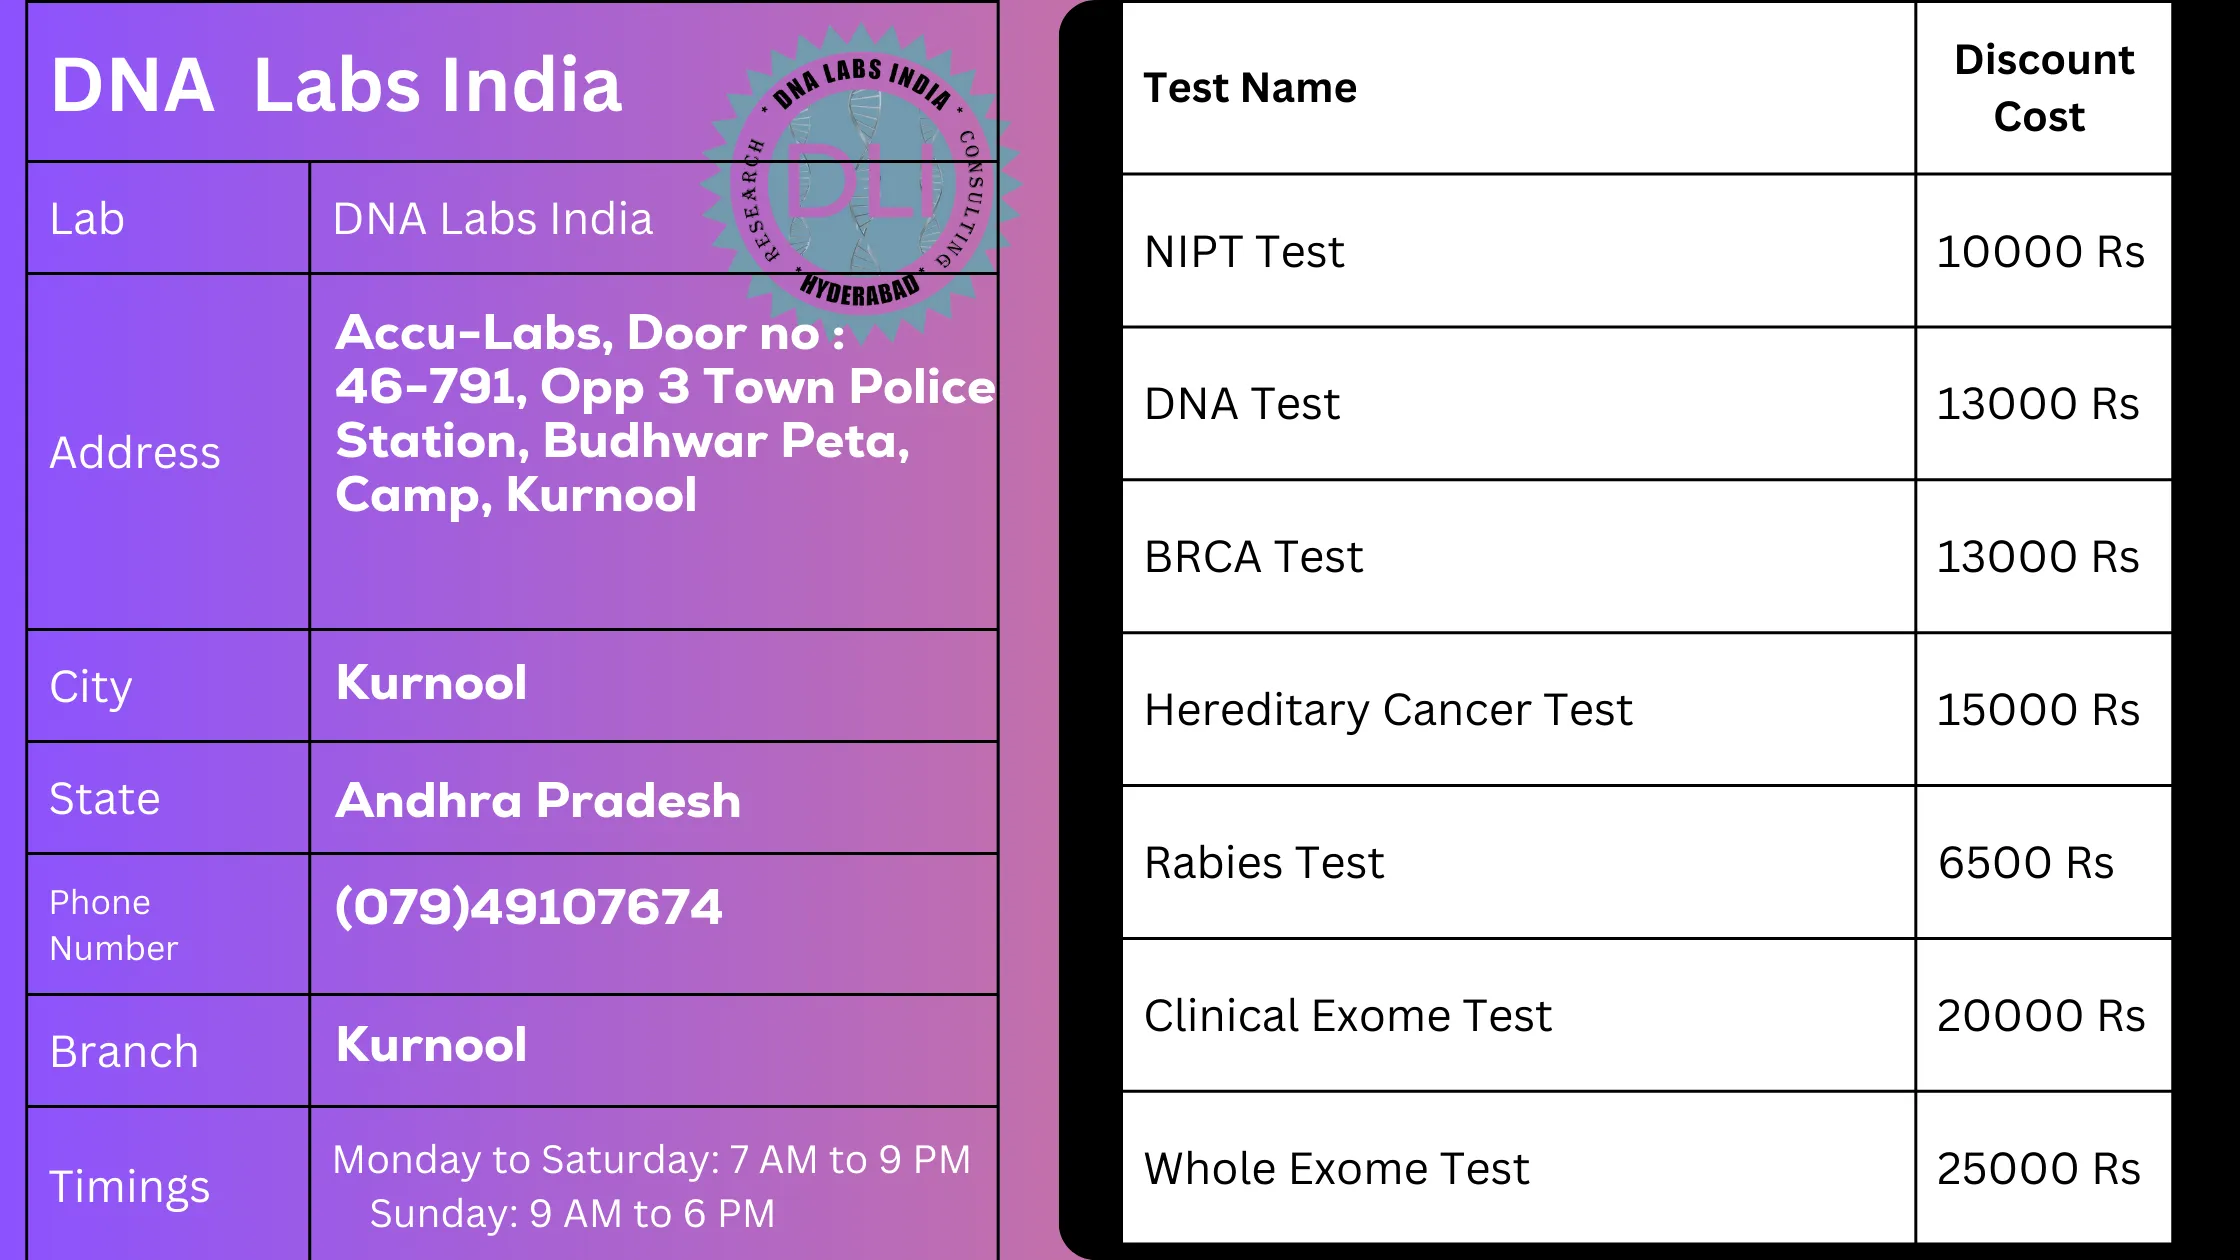 DNA Labs India in Kurnool: Offering Accurate and Reliable Genetic Tests